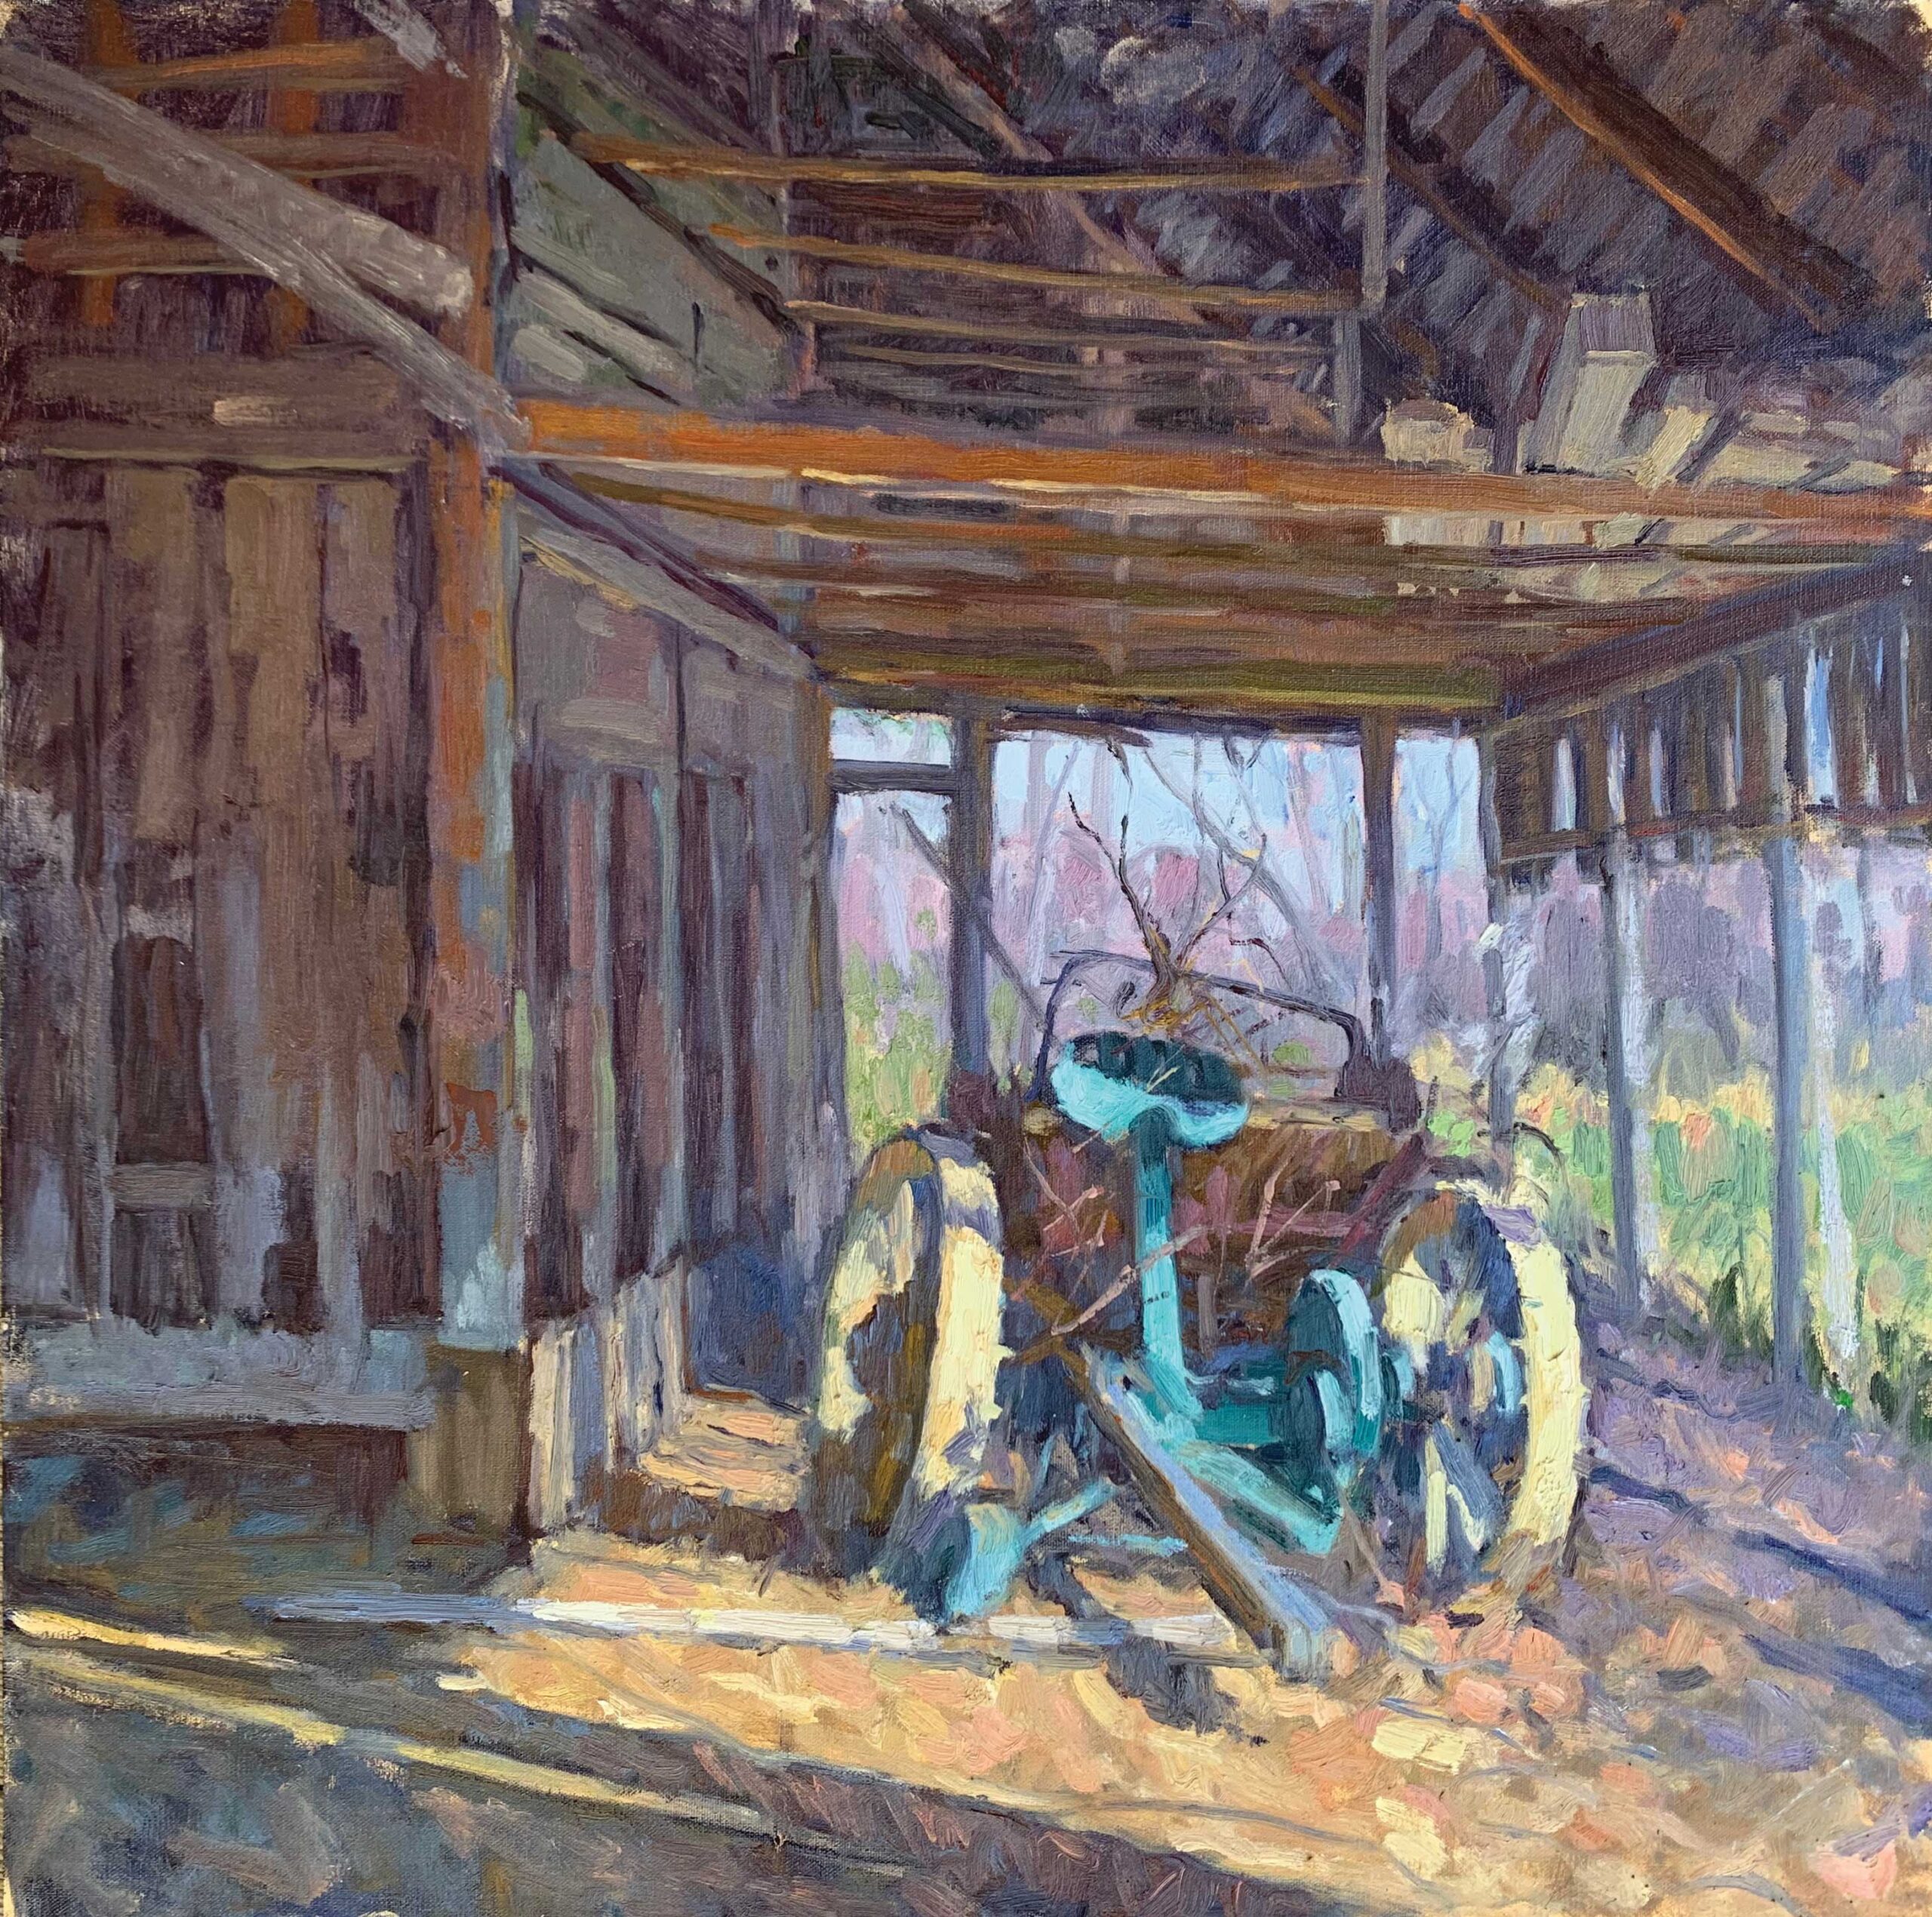 Alison Barry, "Rust and Dust," 2022, oil, 20 x 20 in., Private collection, Plein air